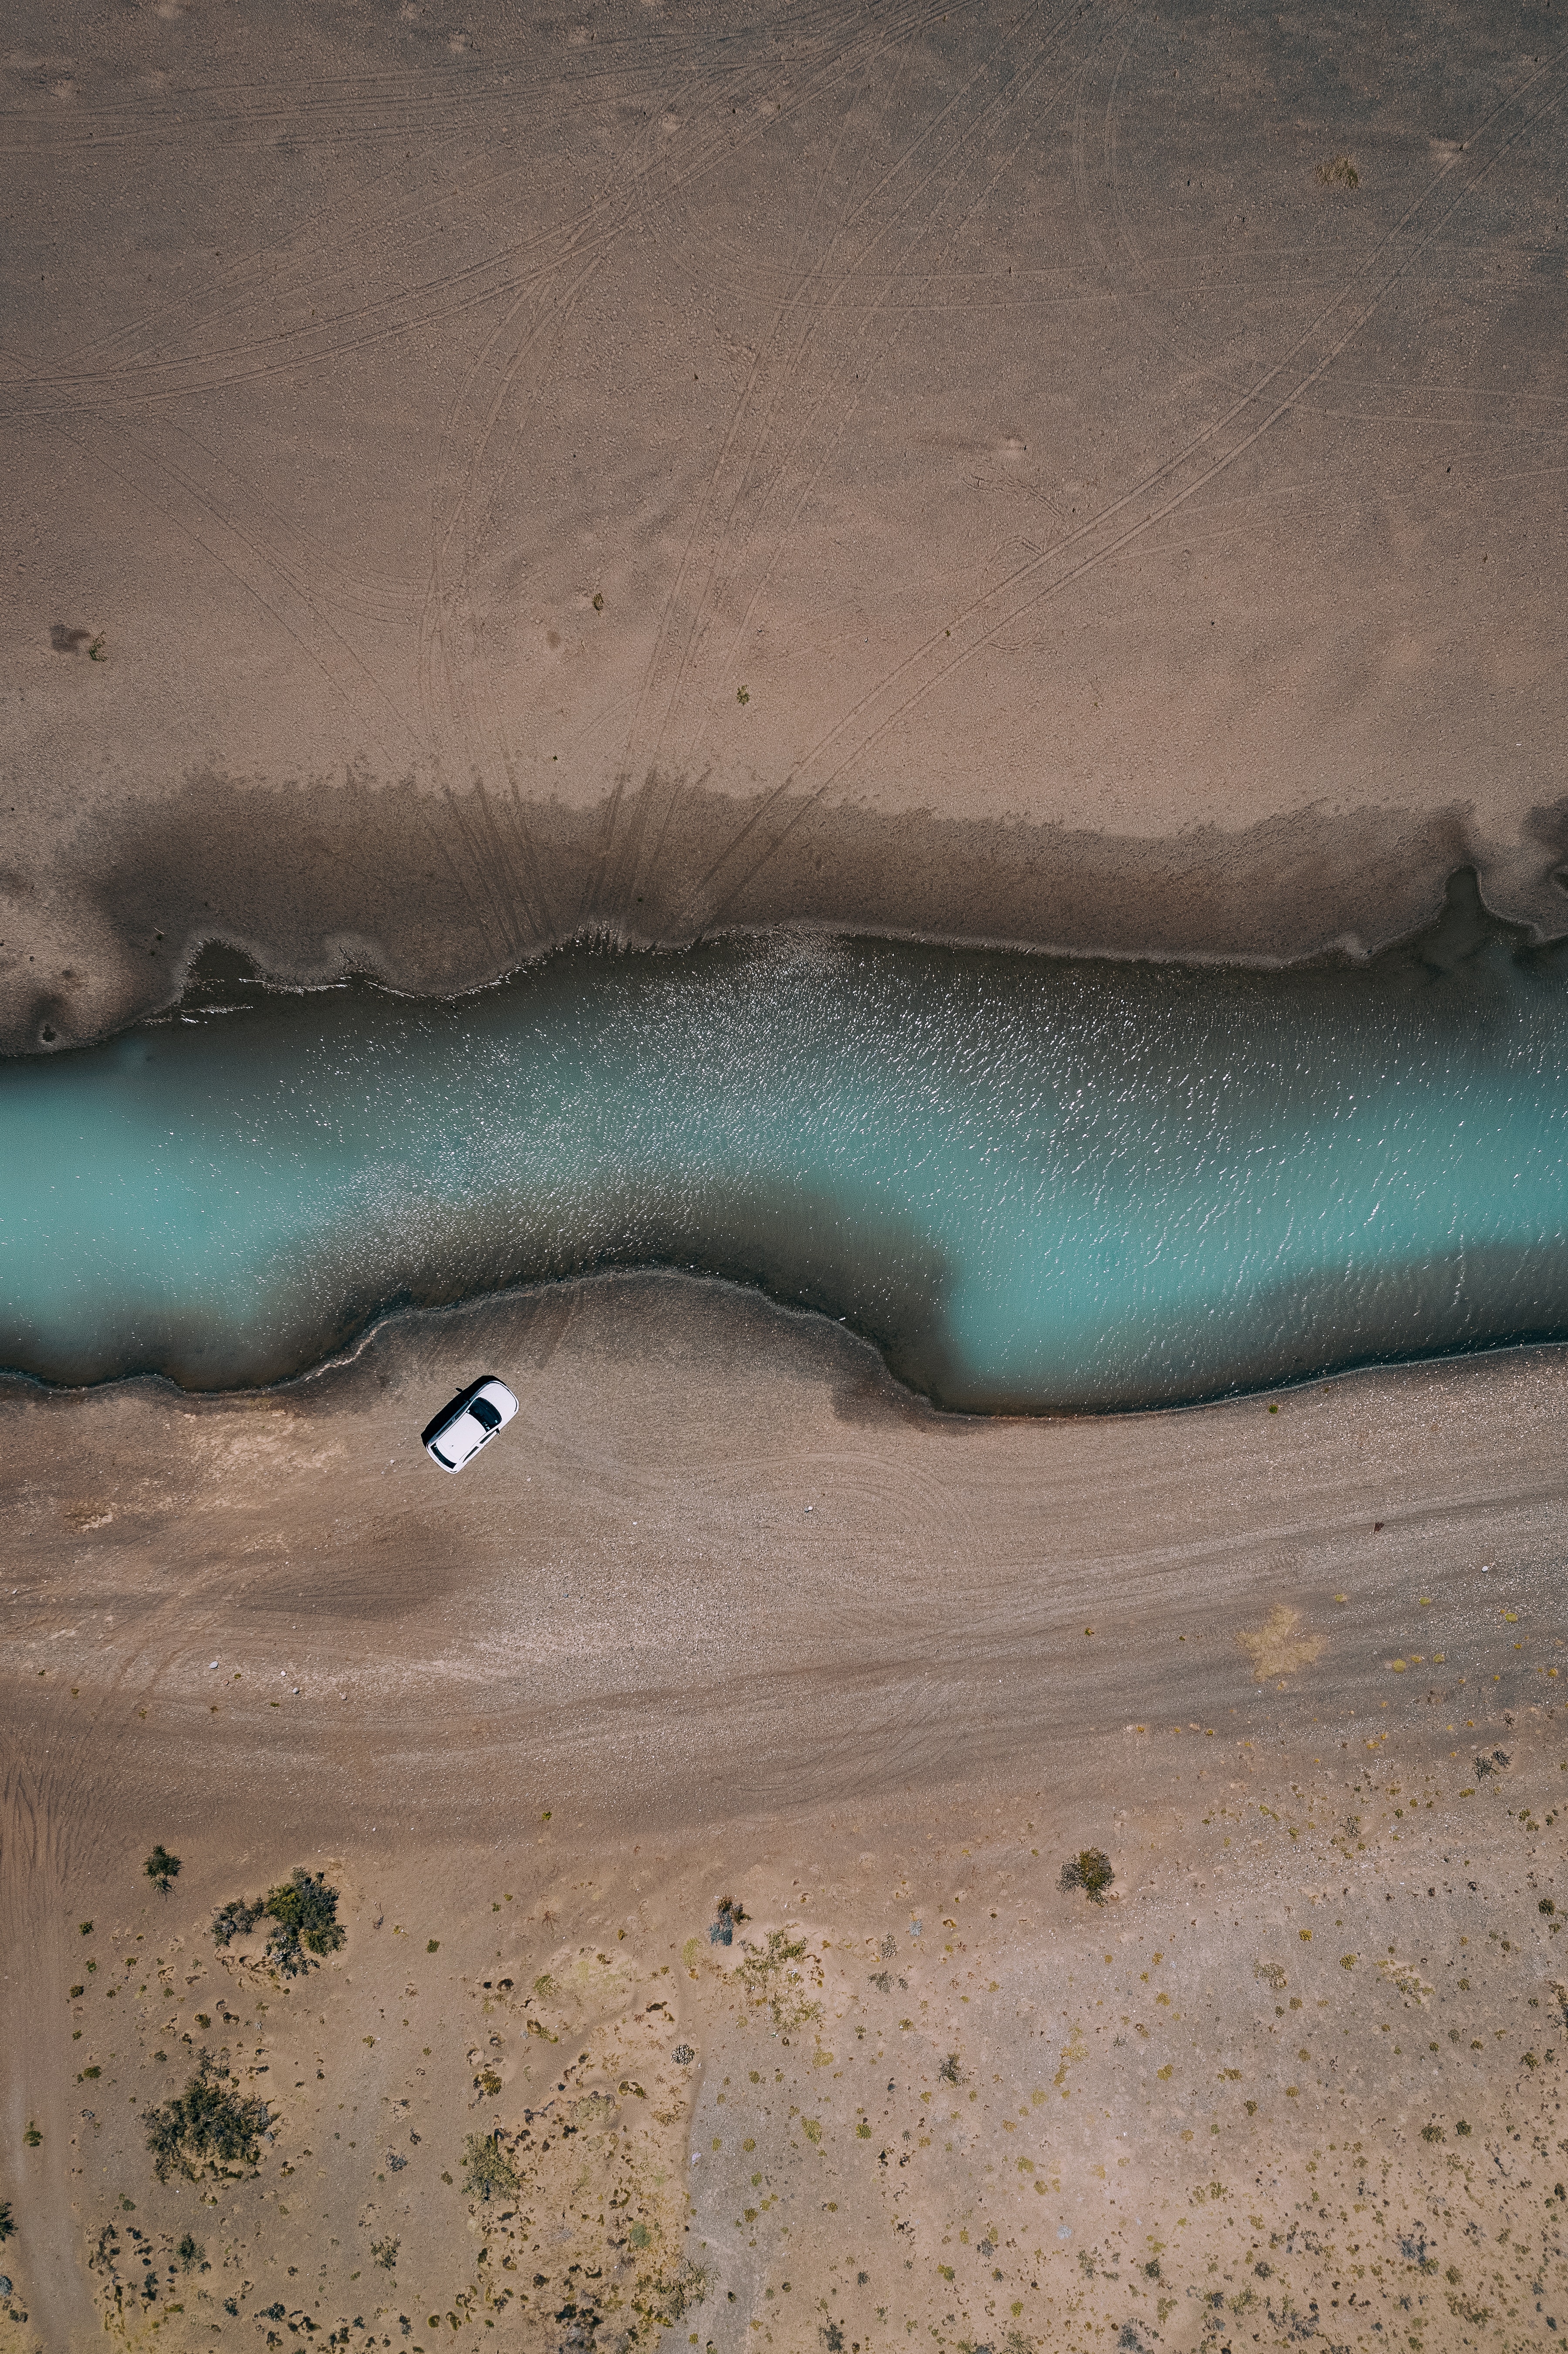 bank, rivers, sand, cars, view from above, shore, car, machine